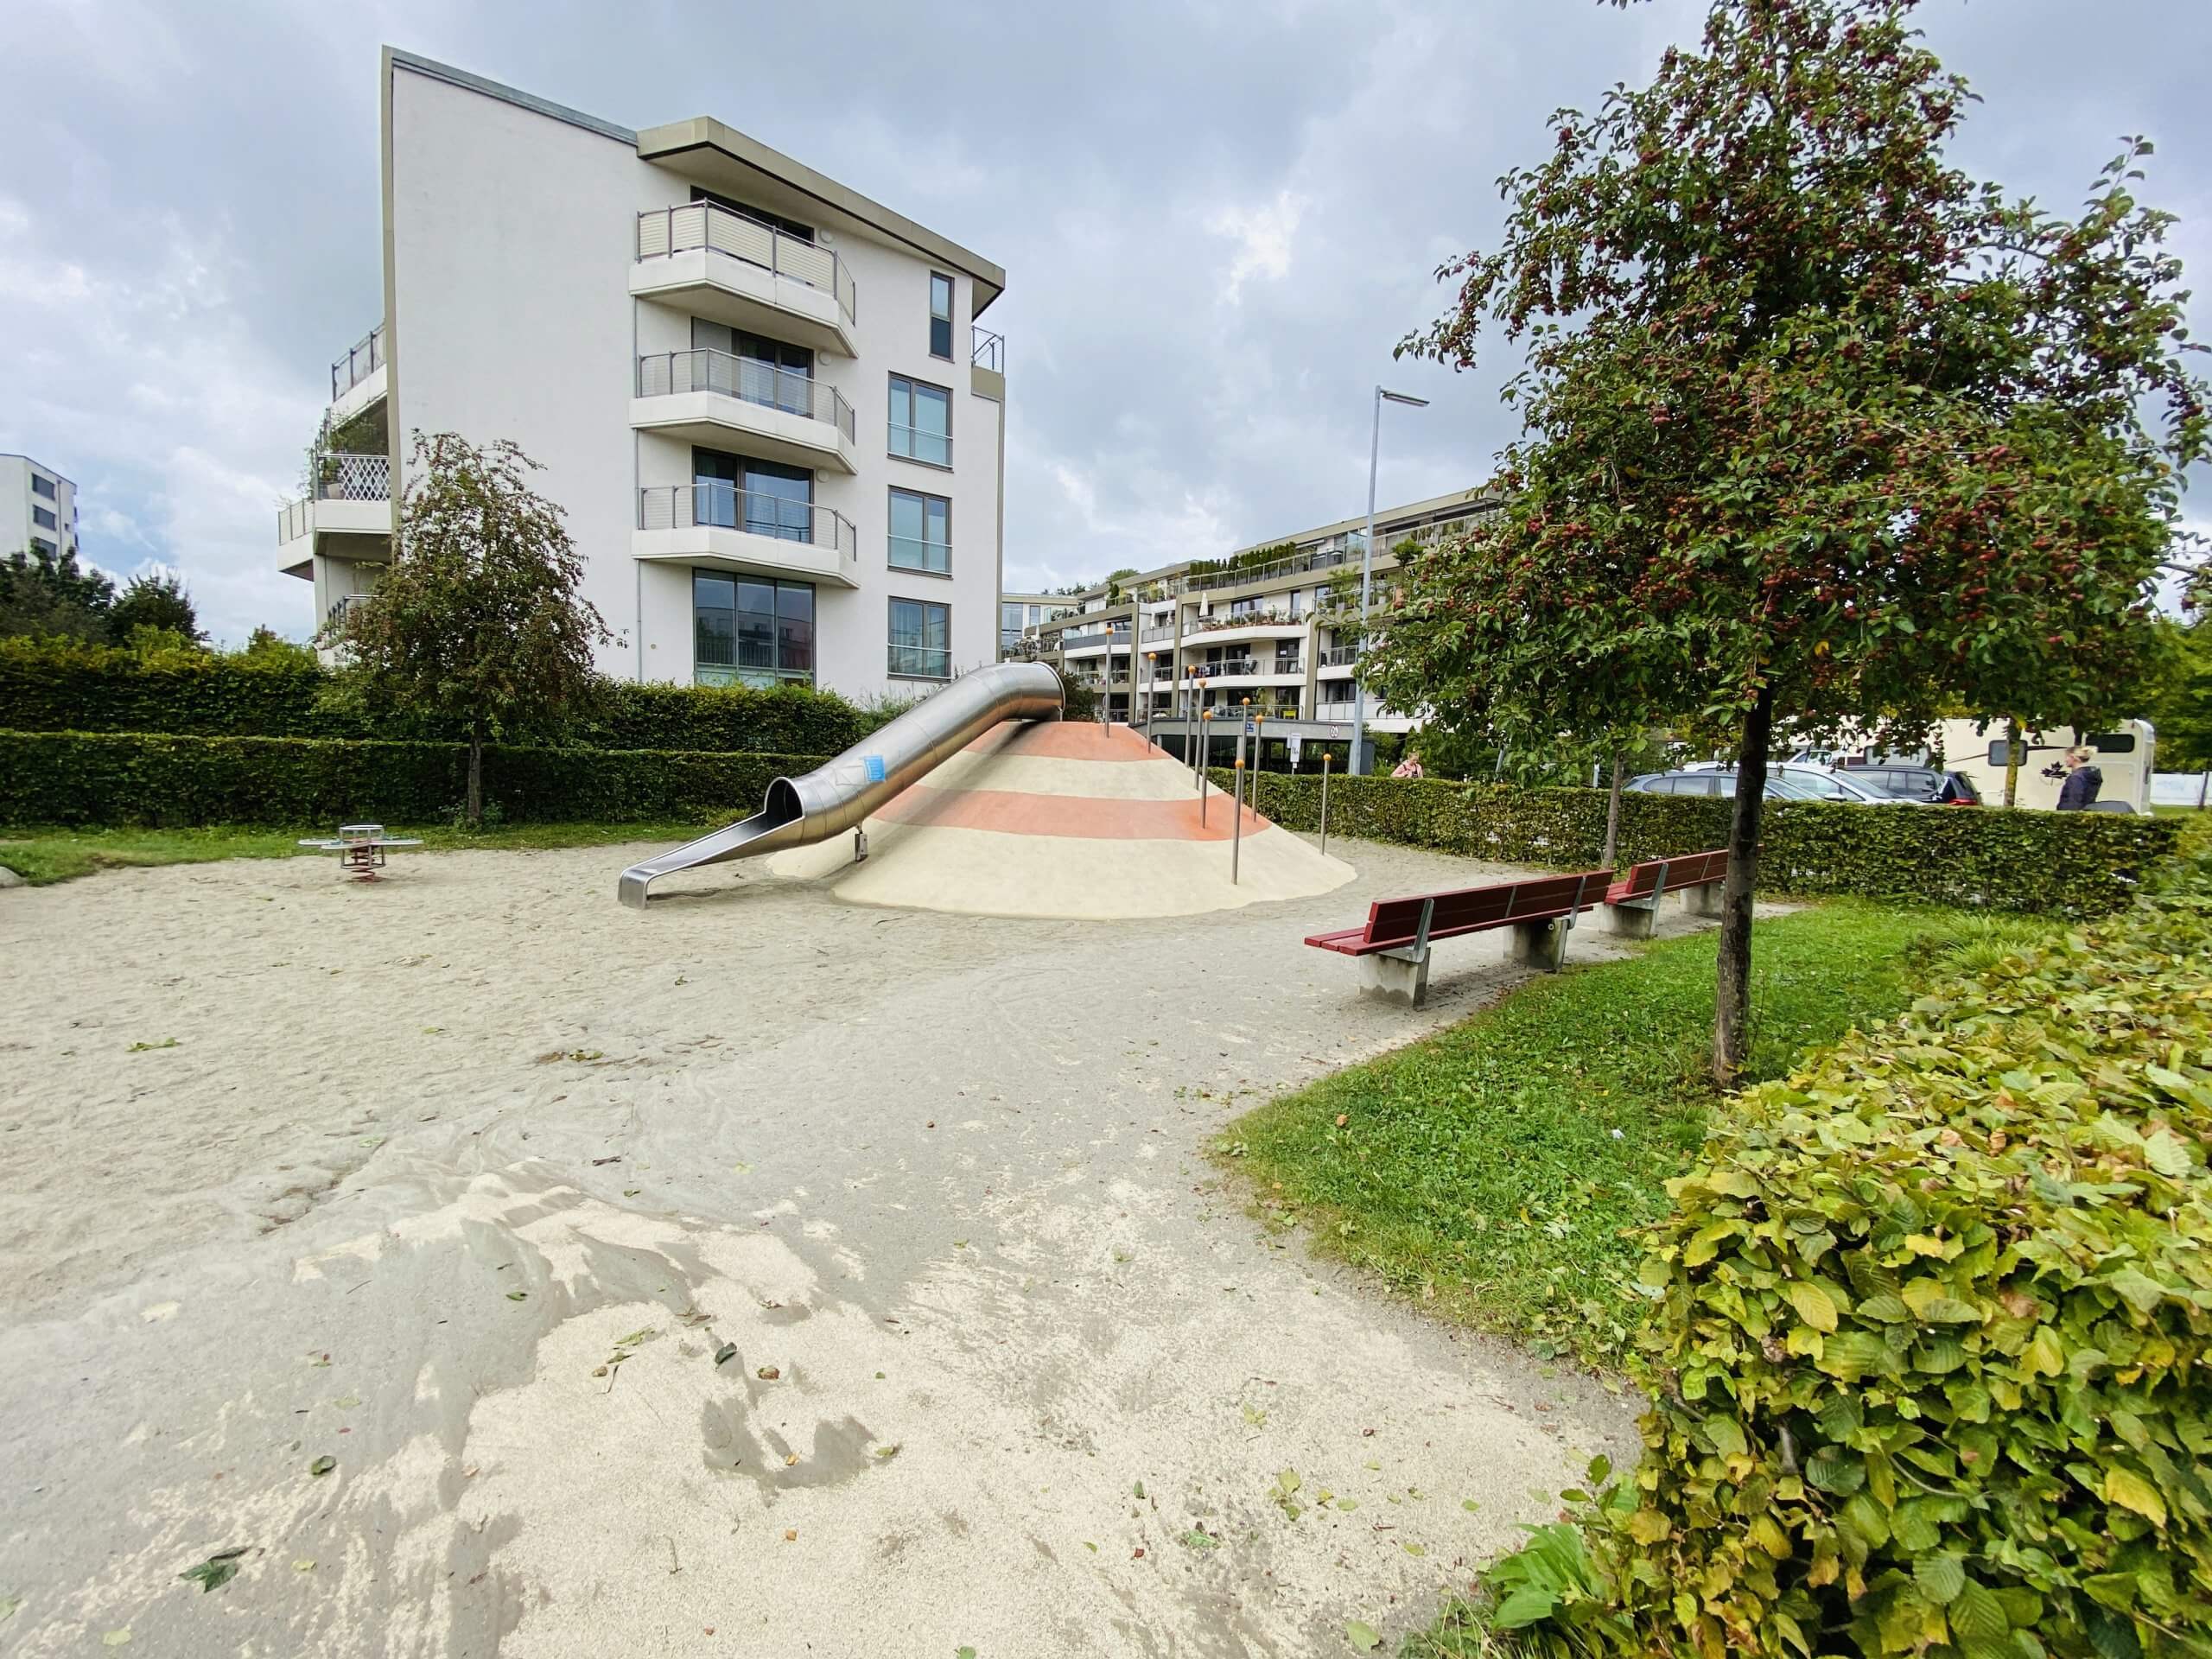 You are currently viewing Playground Seidlhofstraße